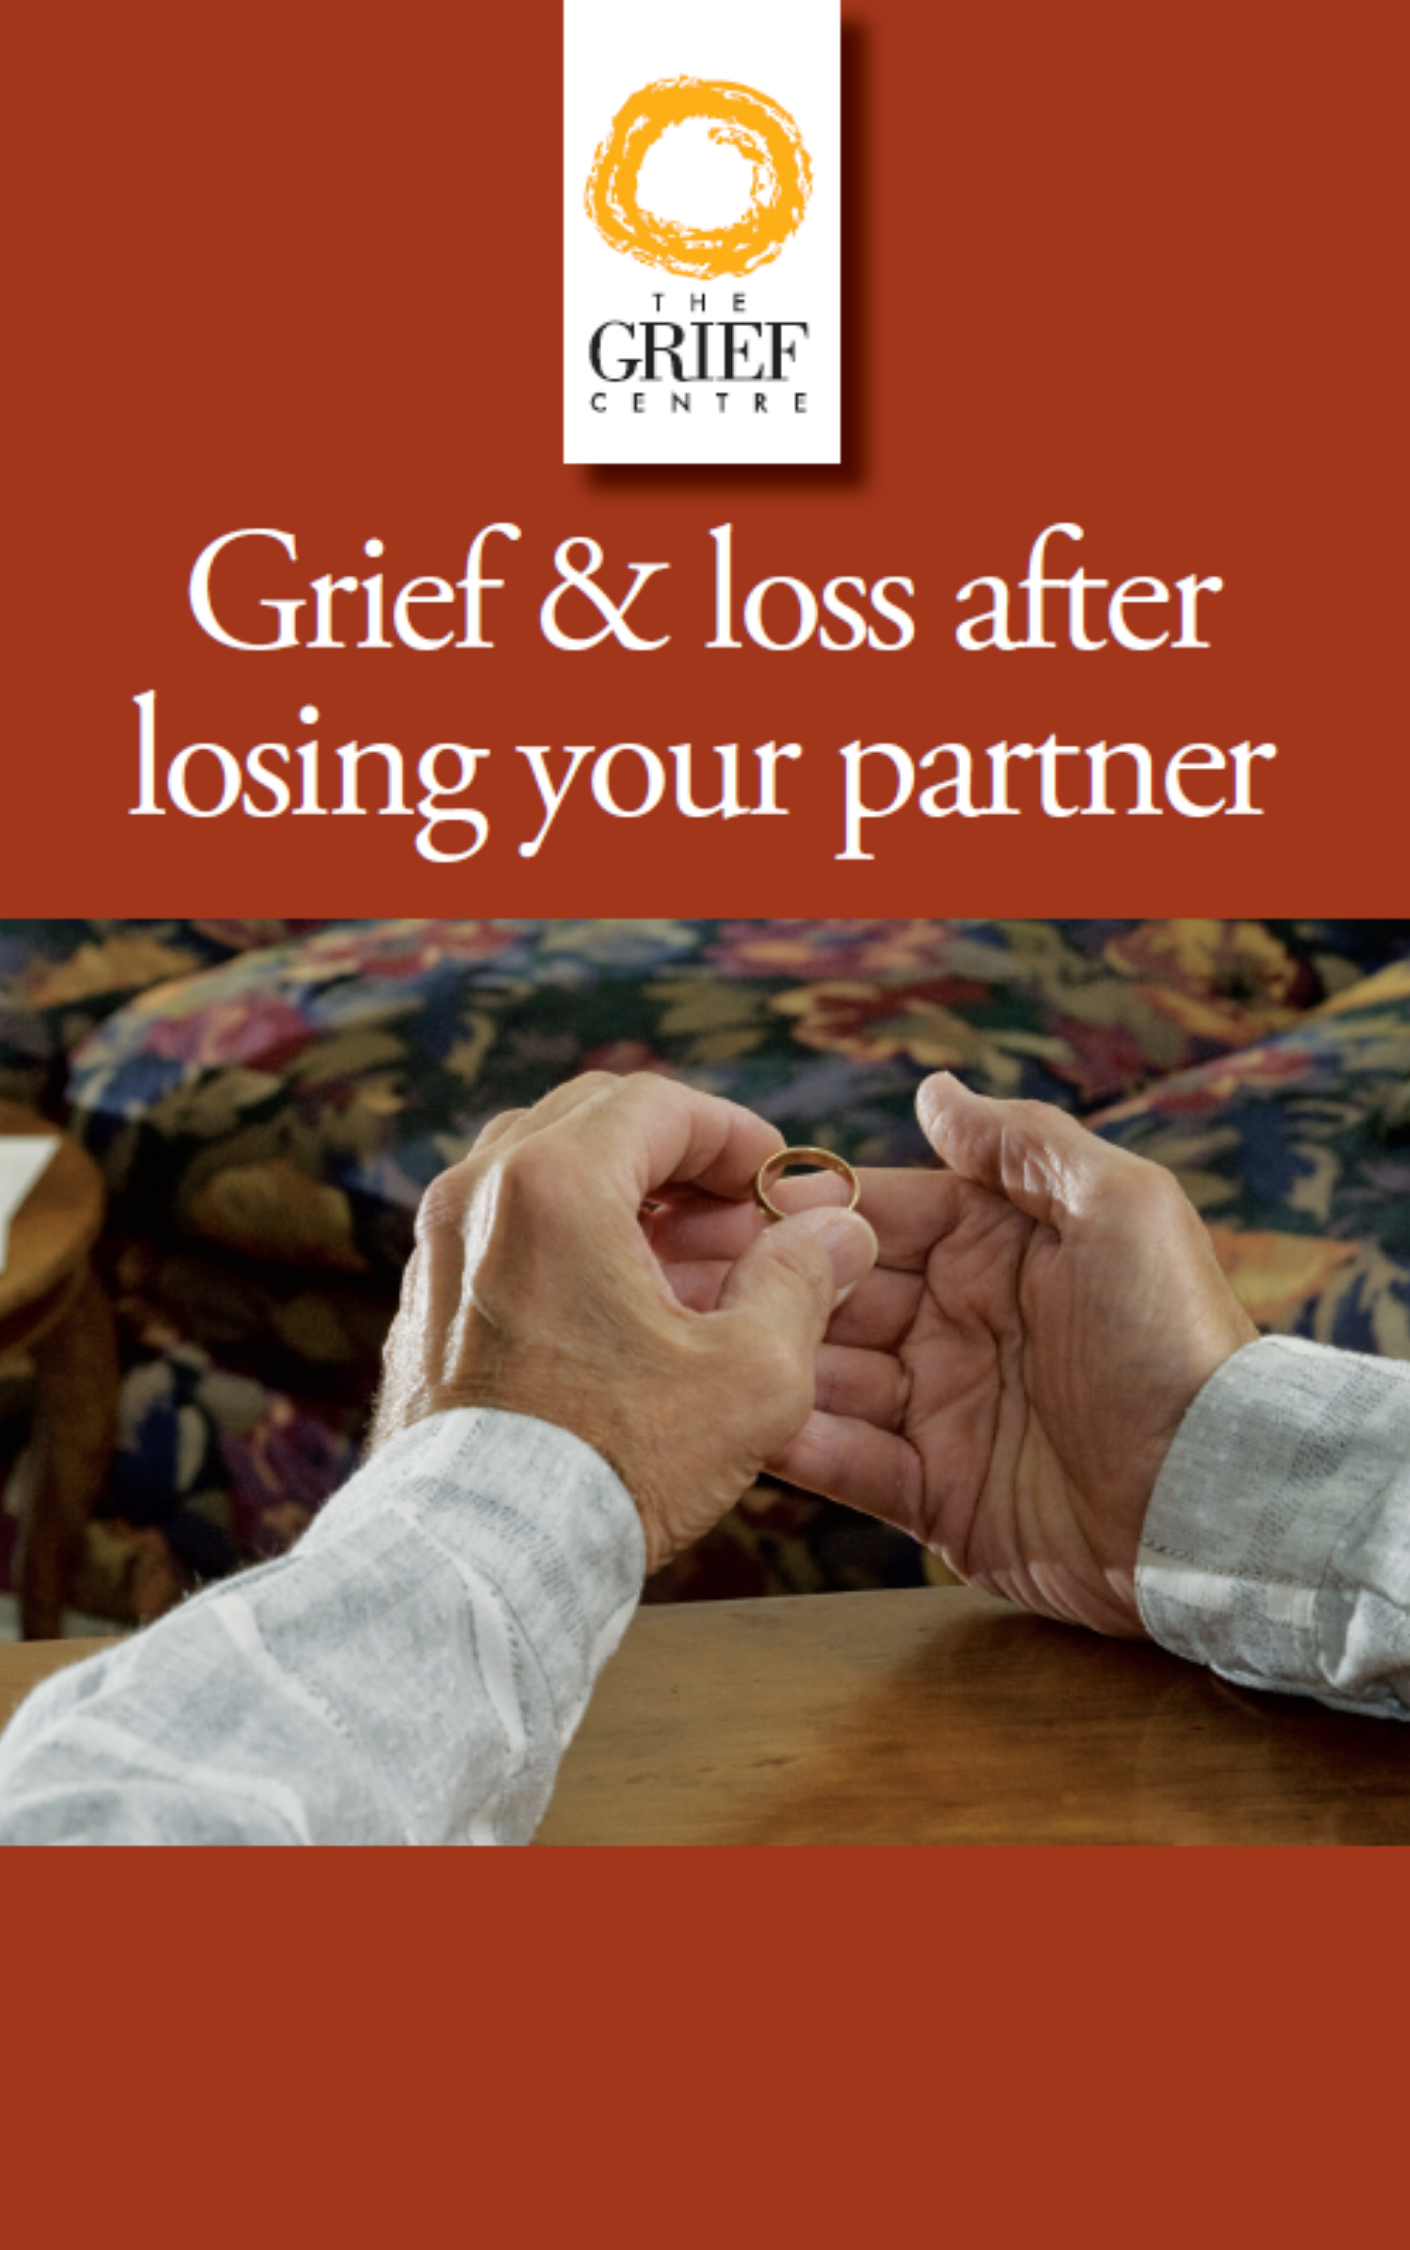 Grief and Loss After Losing your Partner Booklet